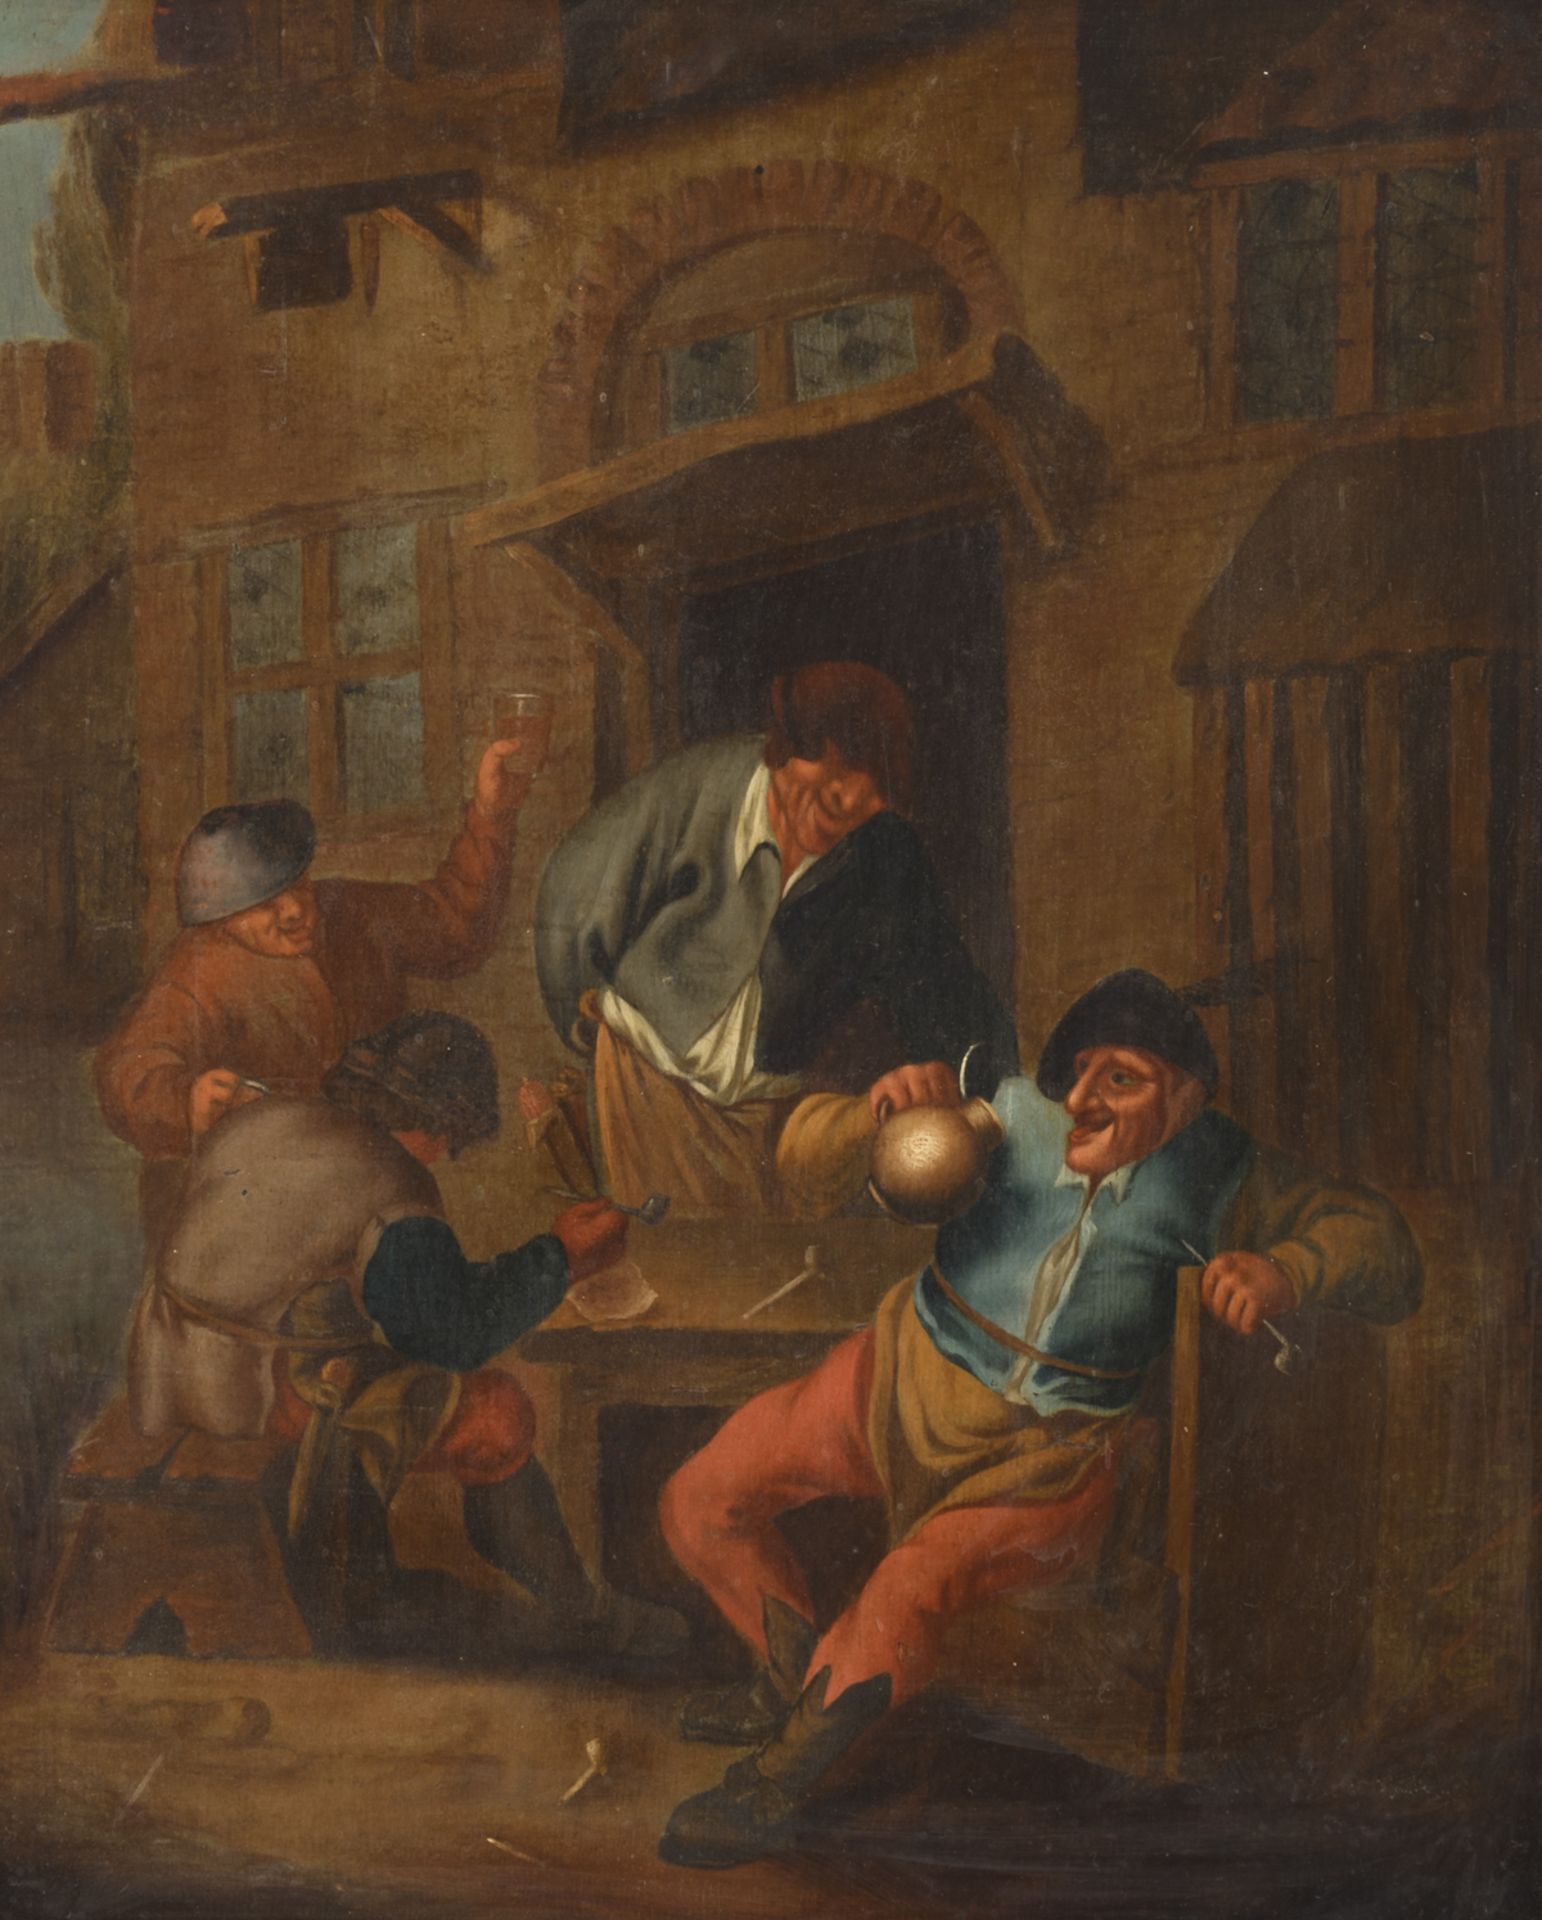 No visible signature, after Teniers, a jolly company at a tavern, oil on panel, 28,5 x 34,5 cm